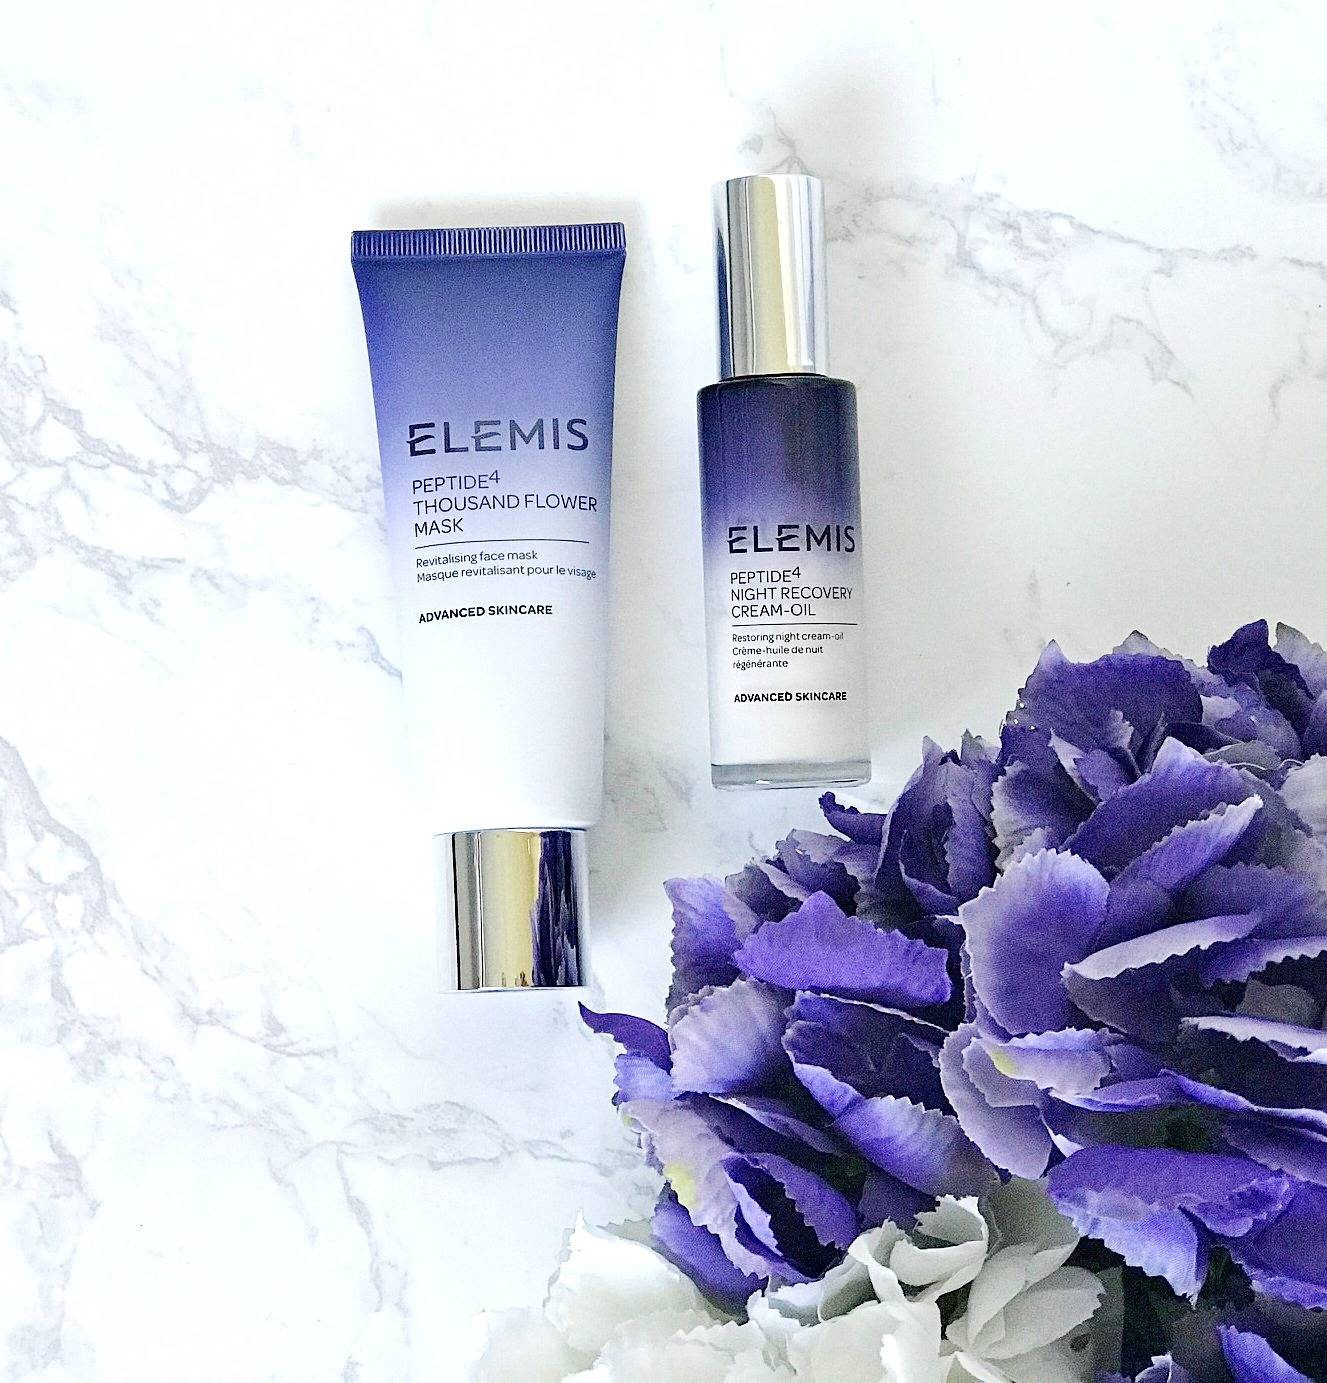 Elemis Peptide Thousand Flower Mask Review, Elemis Night Recovery Cream-Oil Review